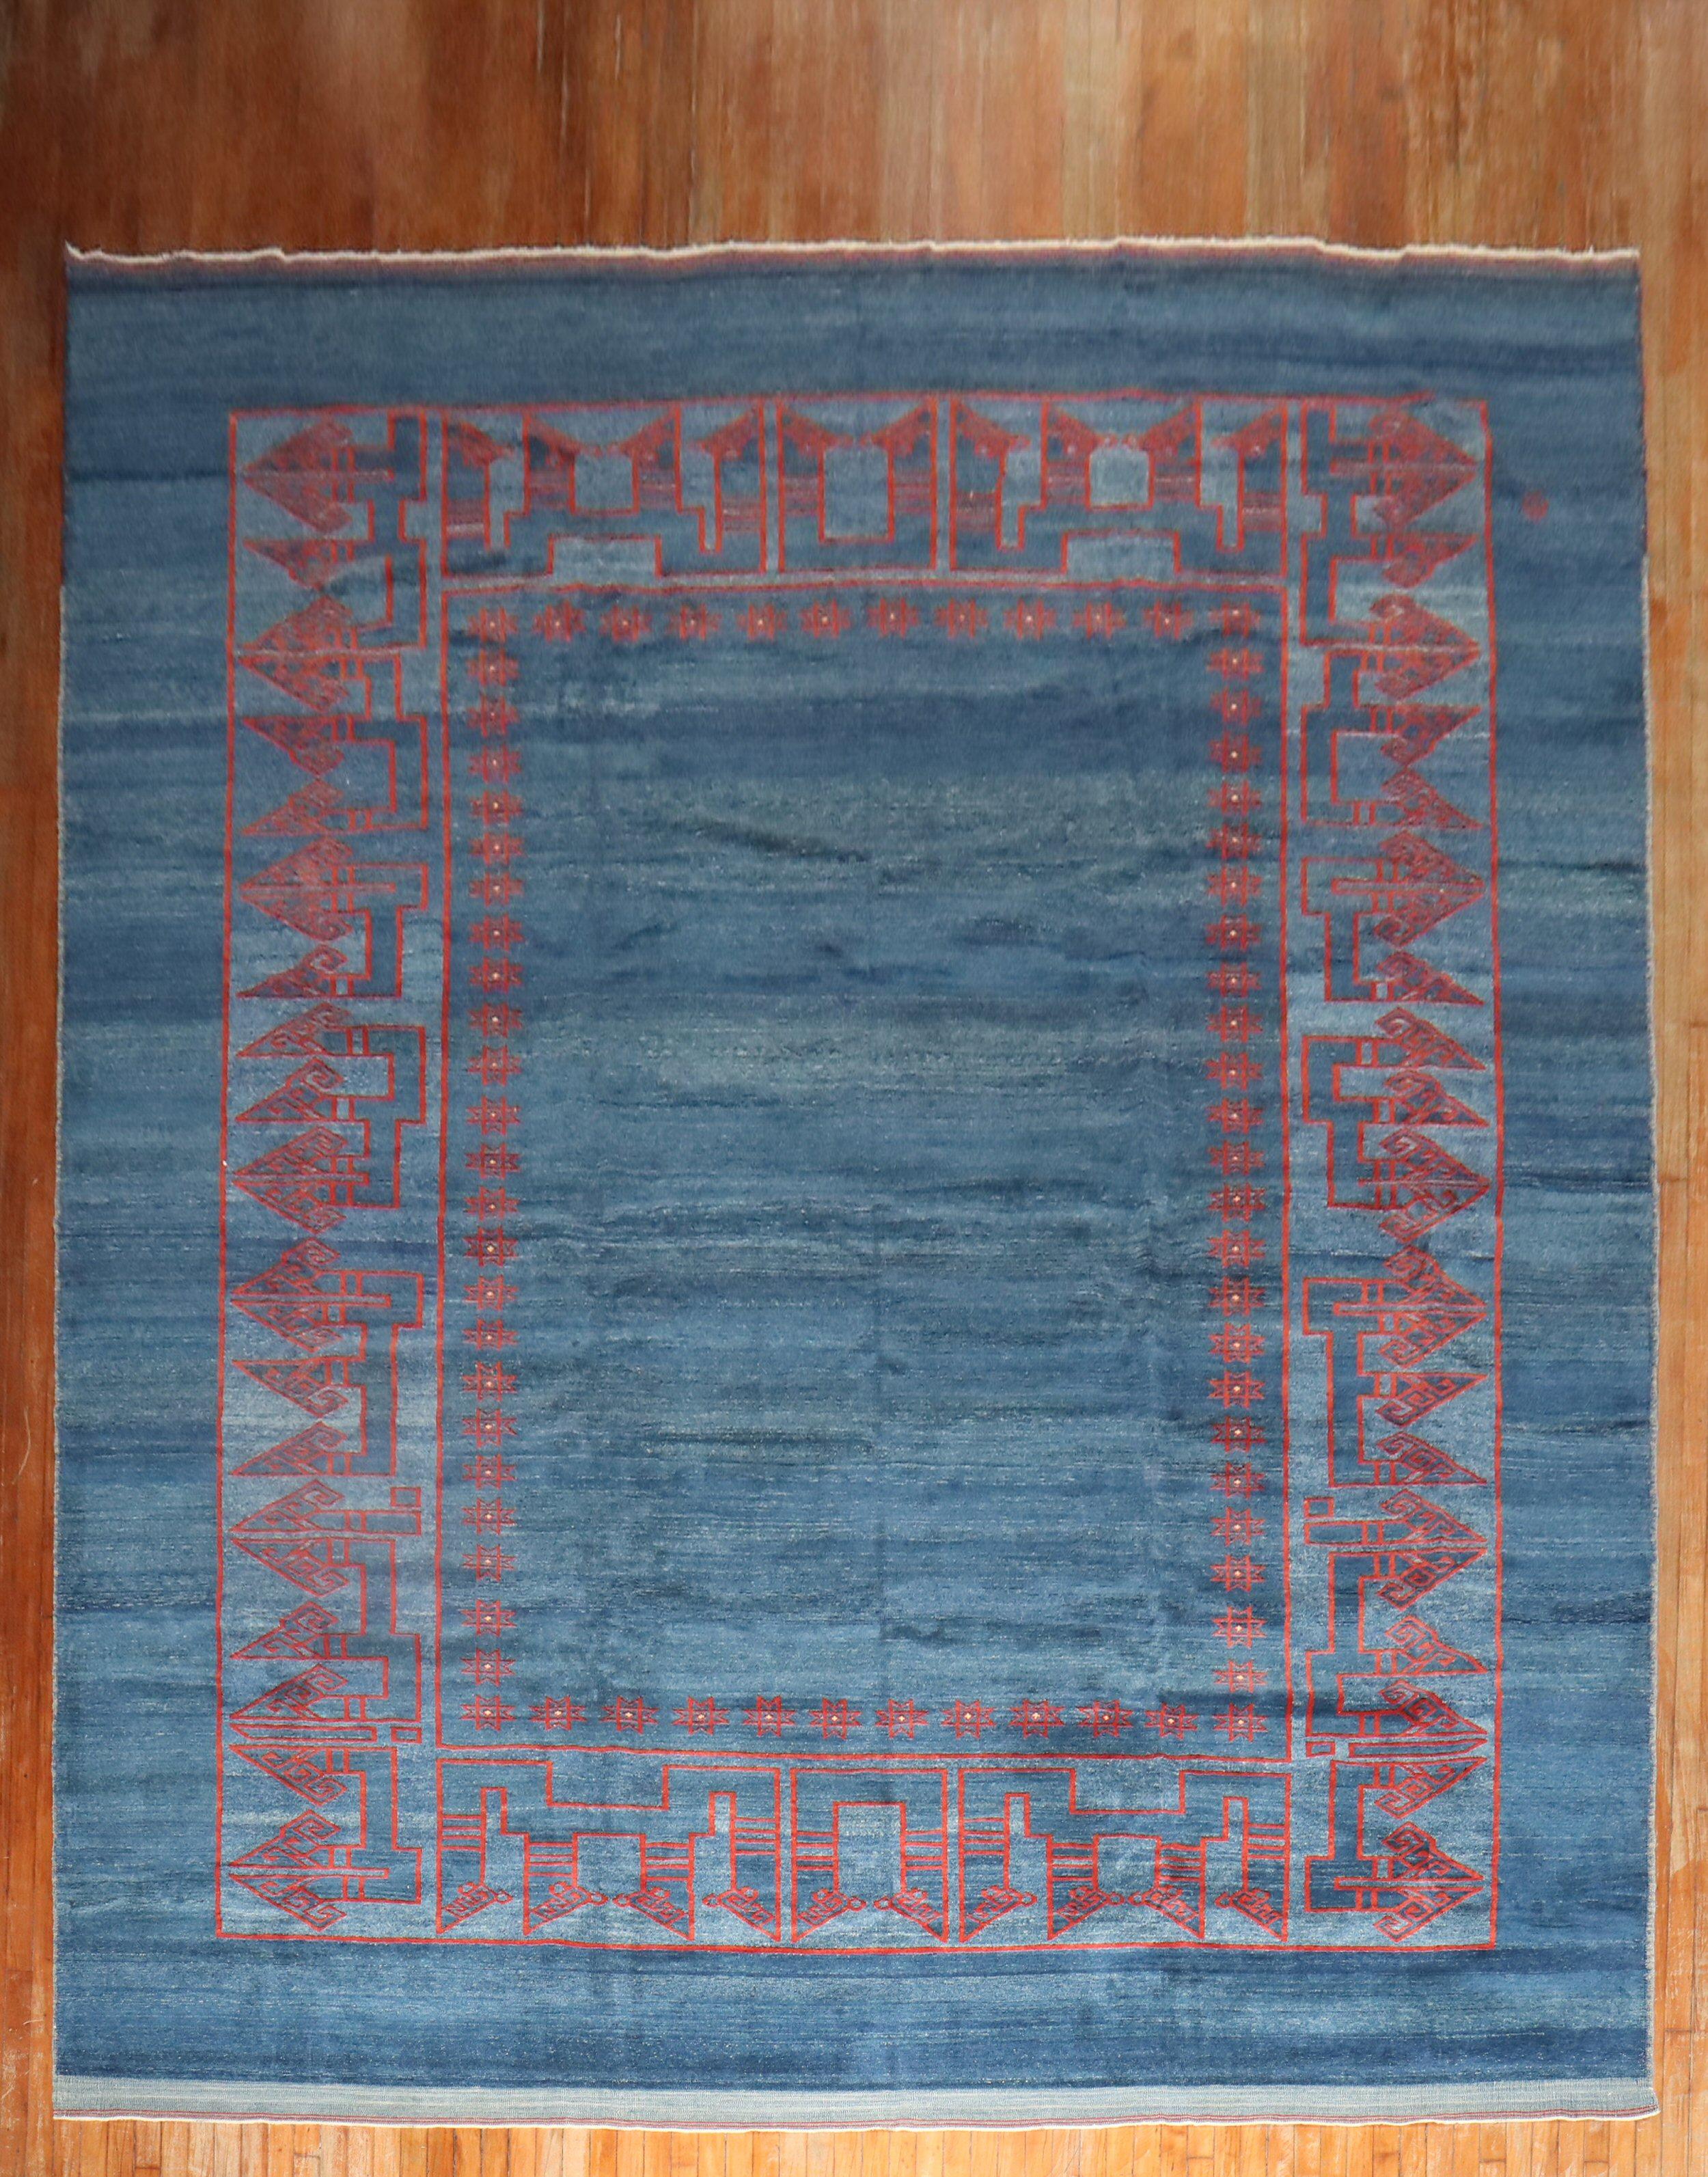 One of a kind 21st century oversize Persian rug with an open field solid design in blue and red.
100% vegetable dyed. Previously Custom ordered but never used as the rug did not work in the intended space

Measures: 11'4'' x 17'5''.